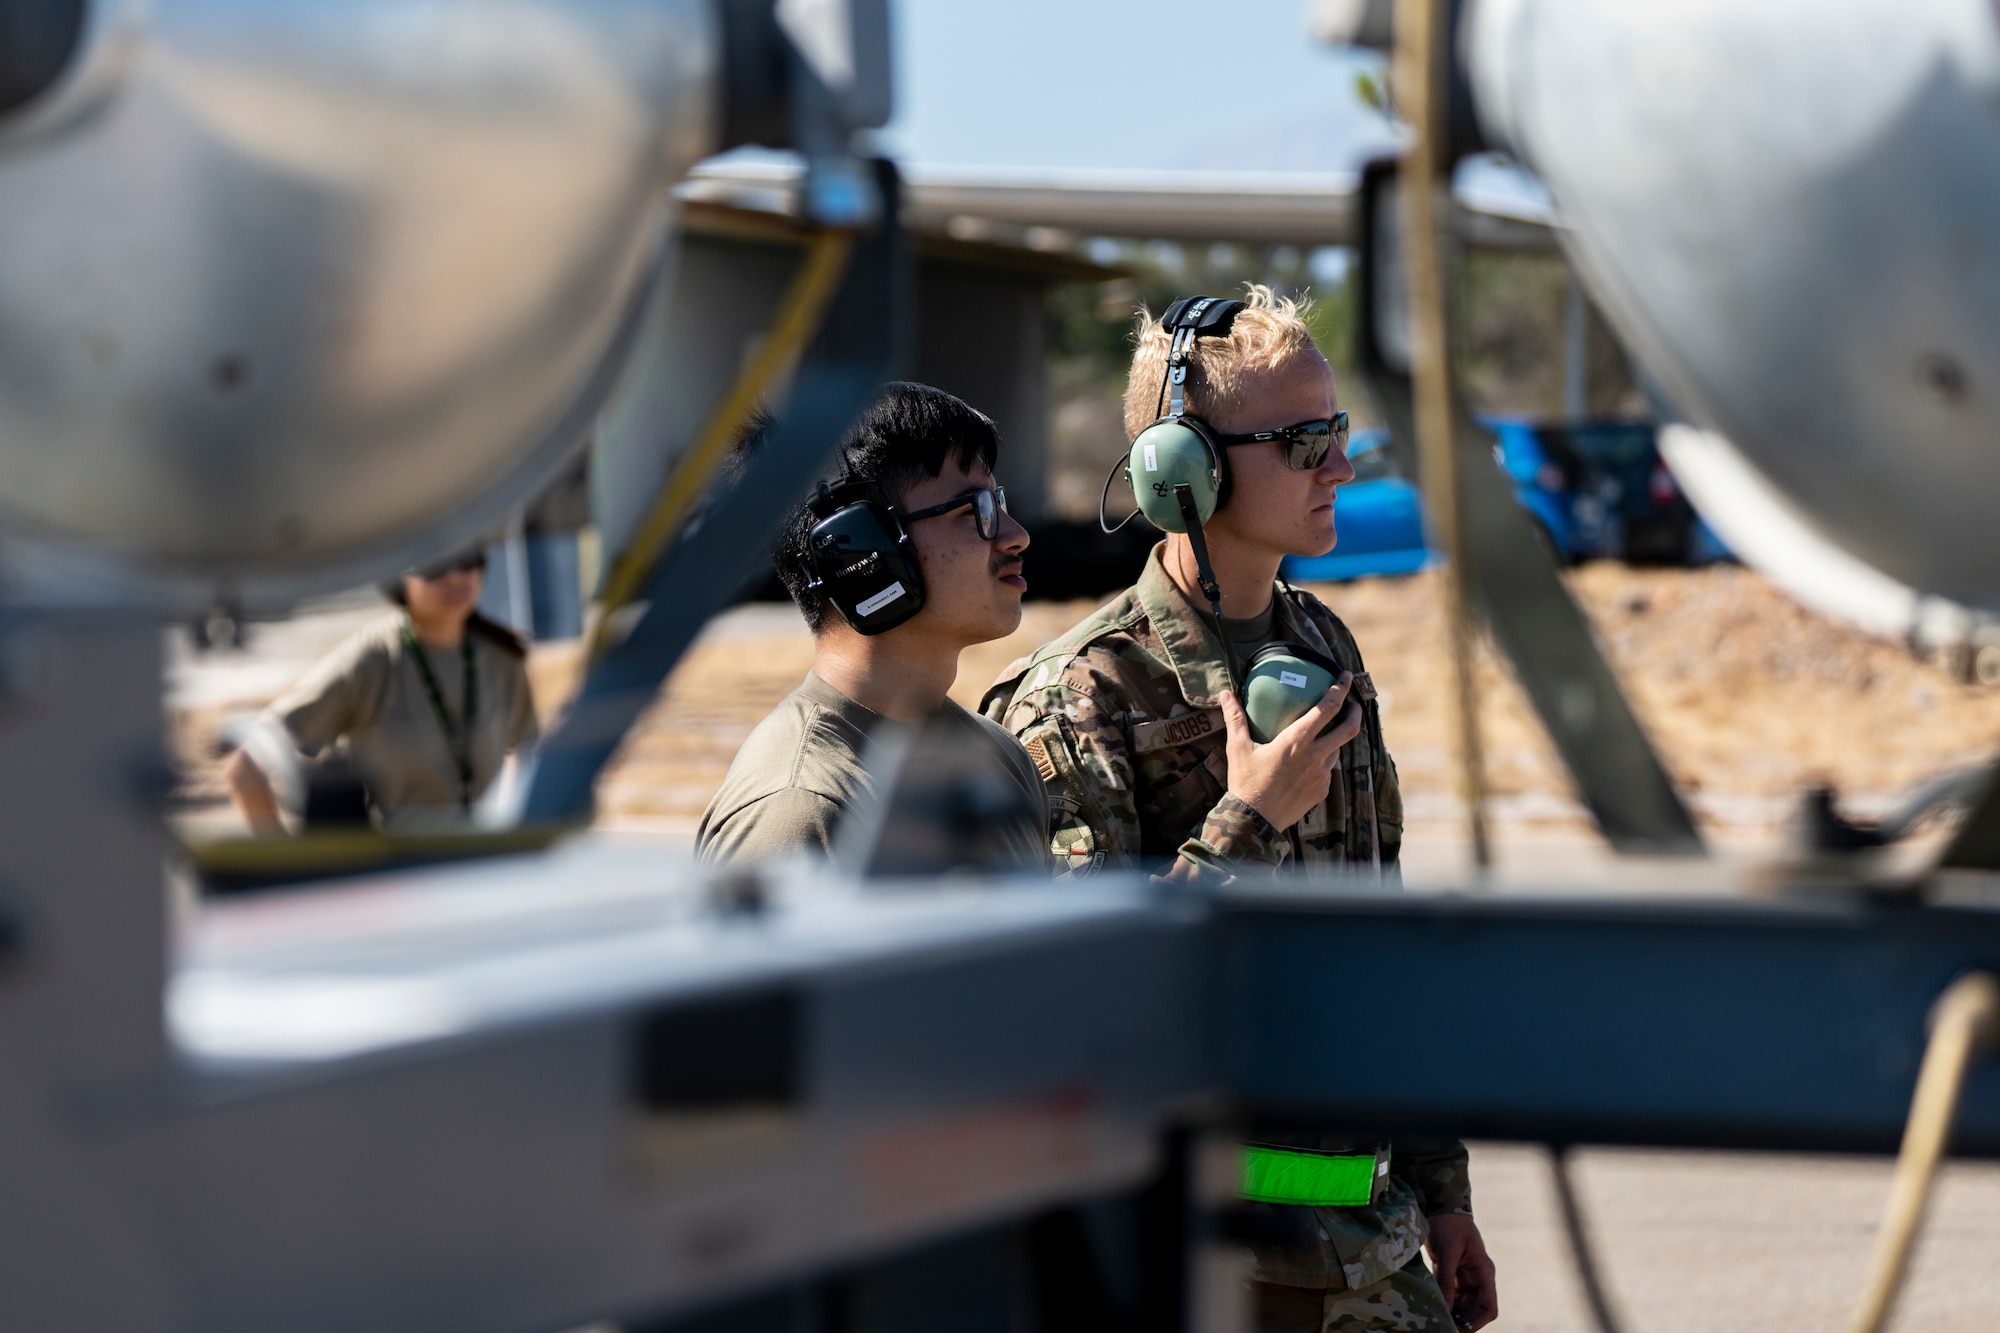 A photo of two Airmen standing behind lighting equipment